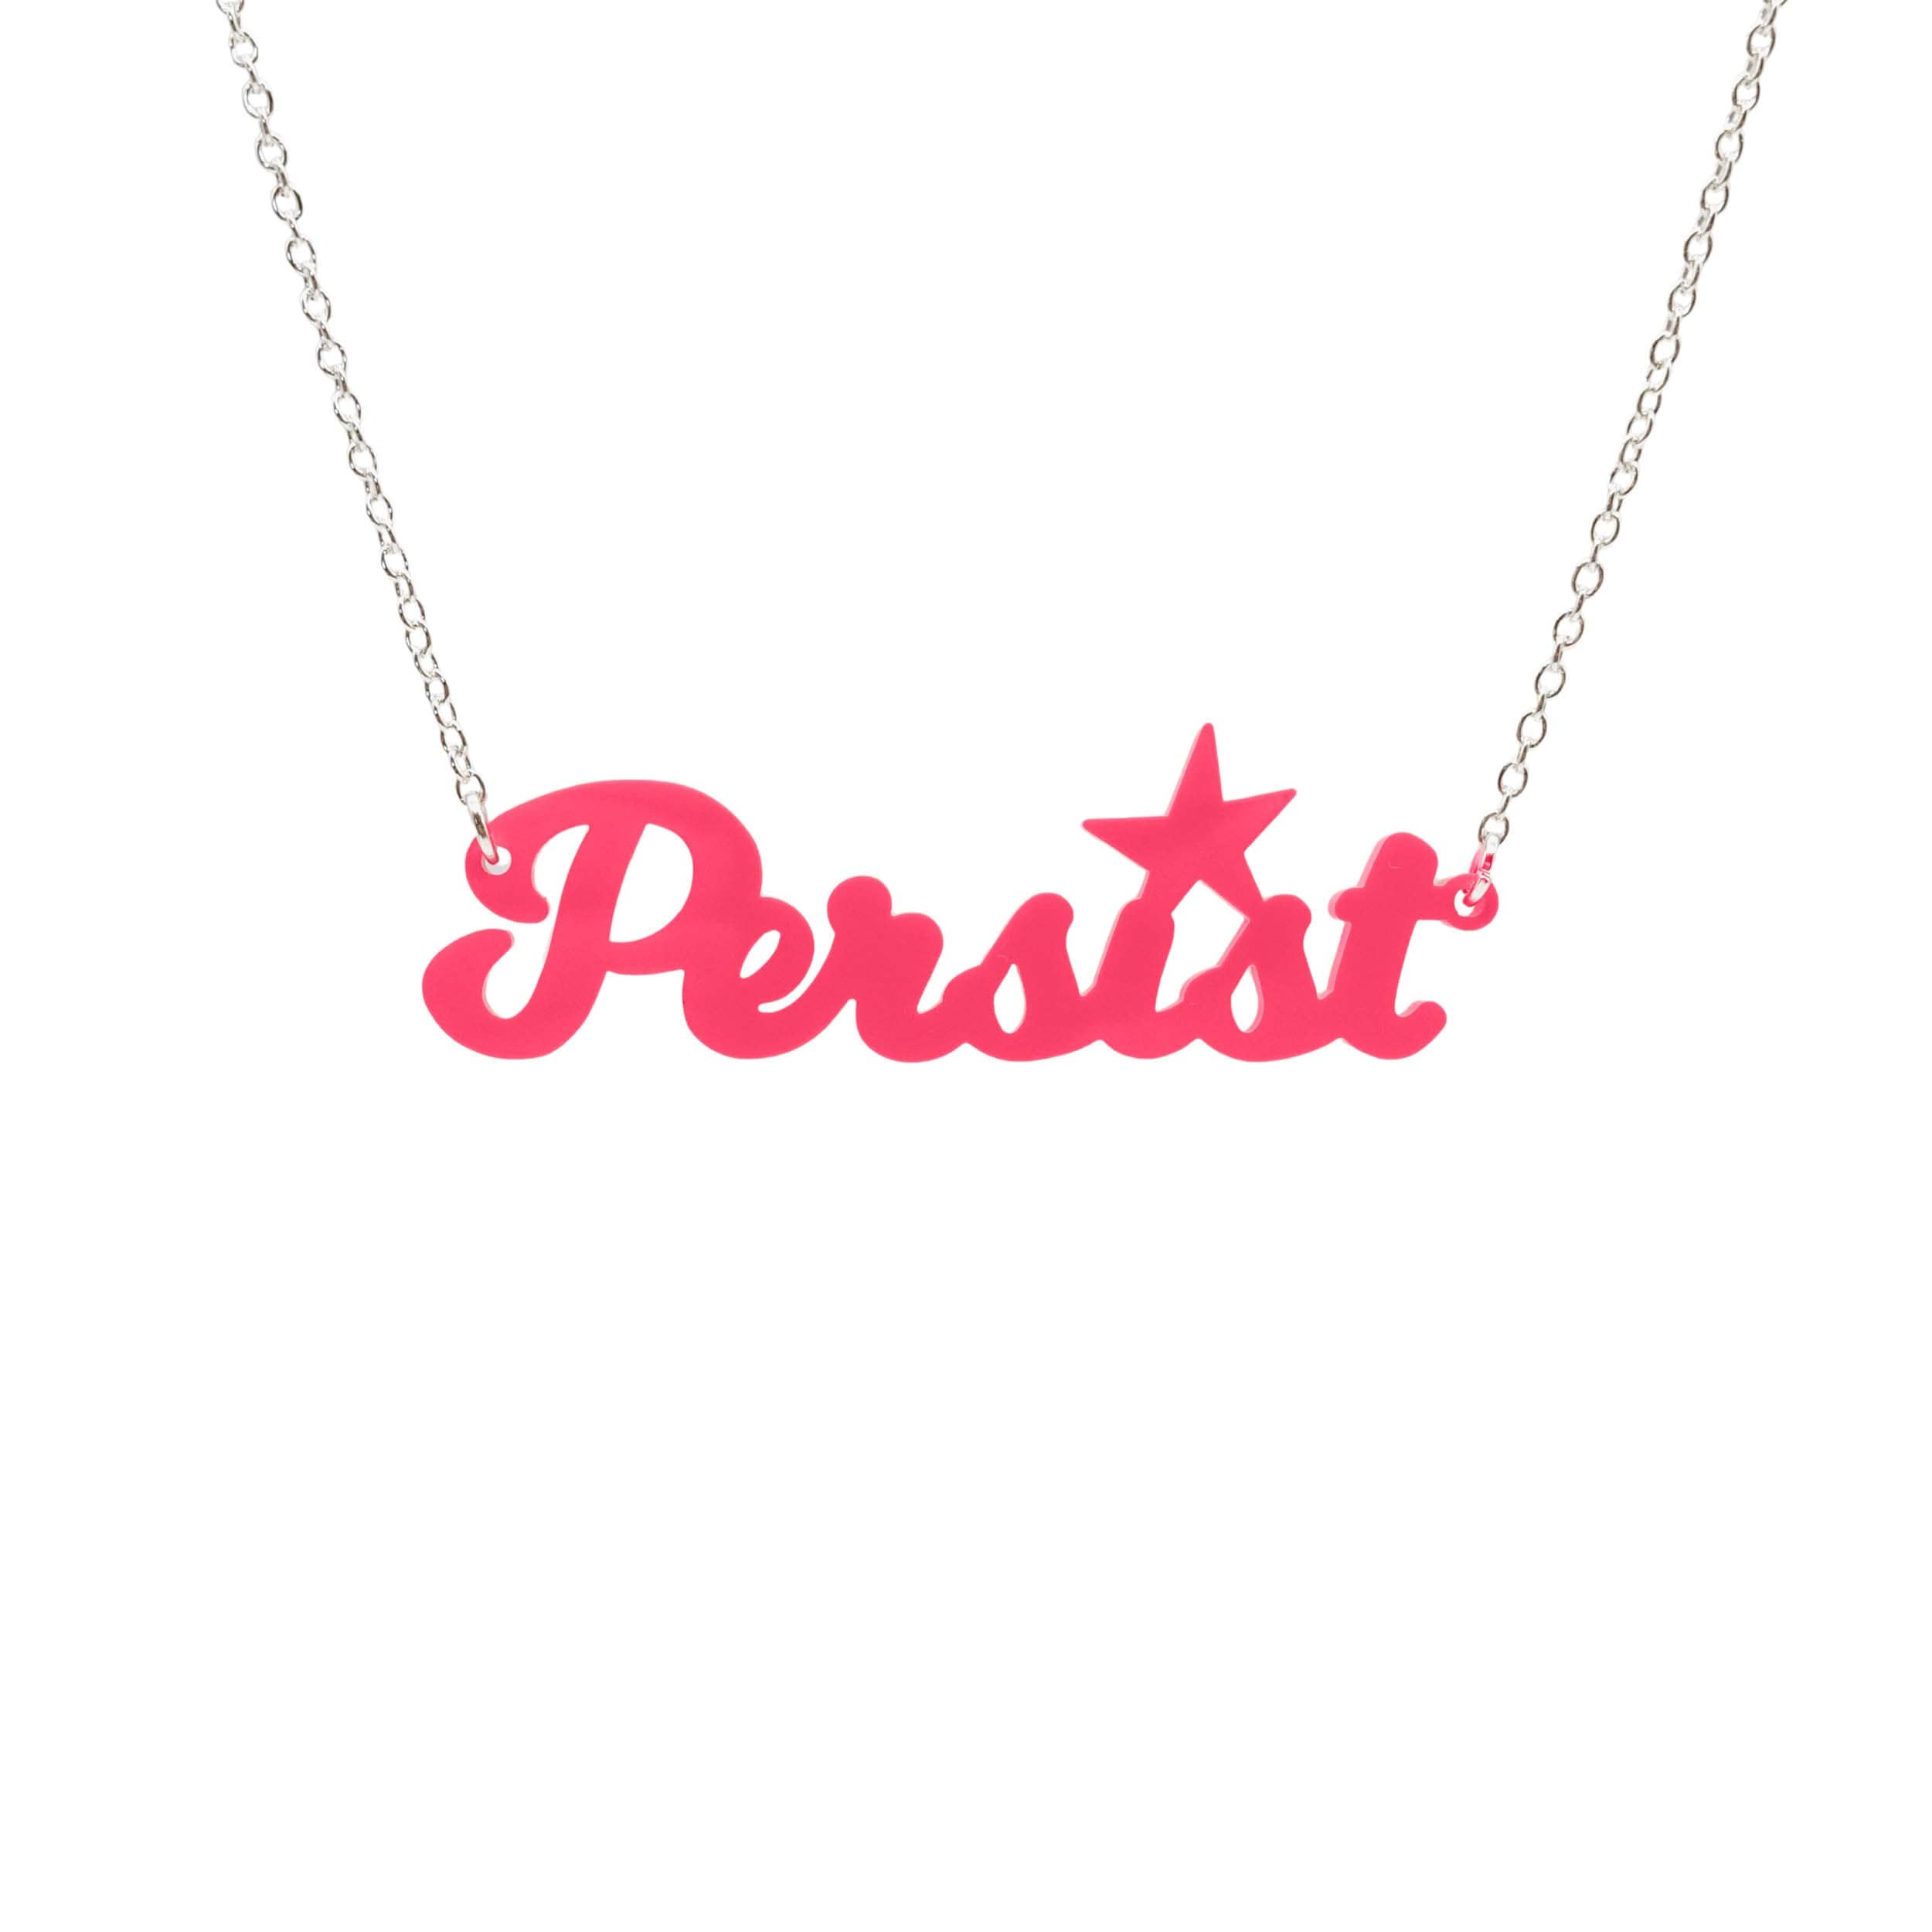 Persist necklace in script font in hot pink, shown hanging on a white background. Join the Persisterhood! 